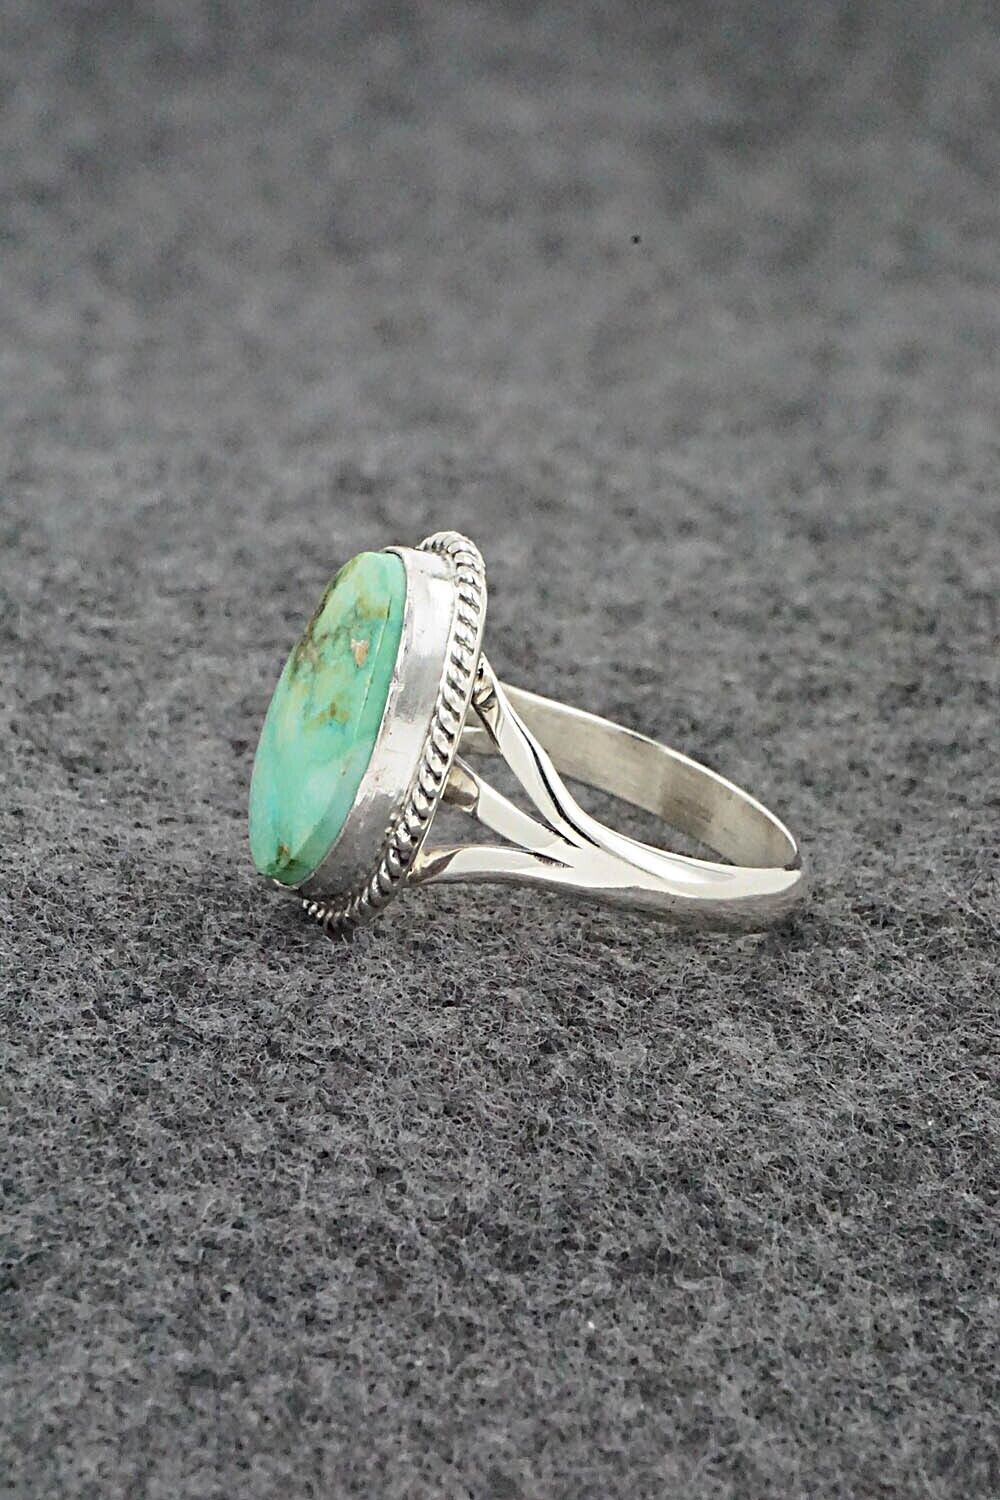 Turquoise & Sterling Silver Ring - Judy Largo - Size 8